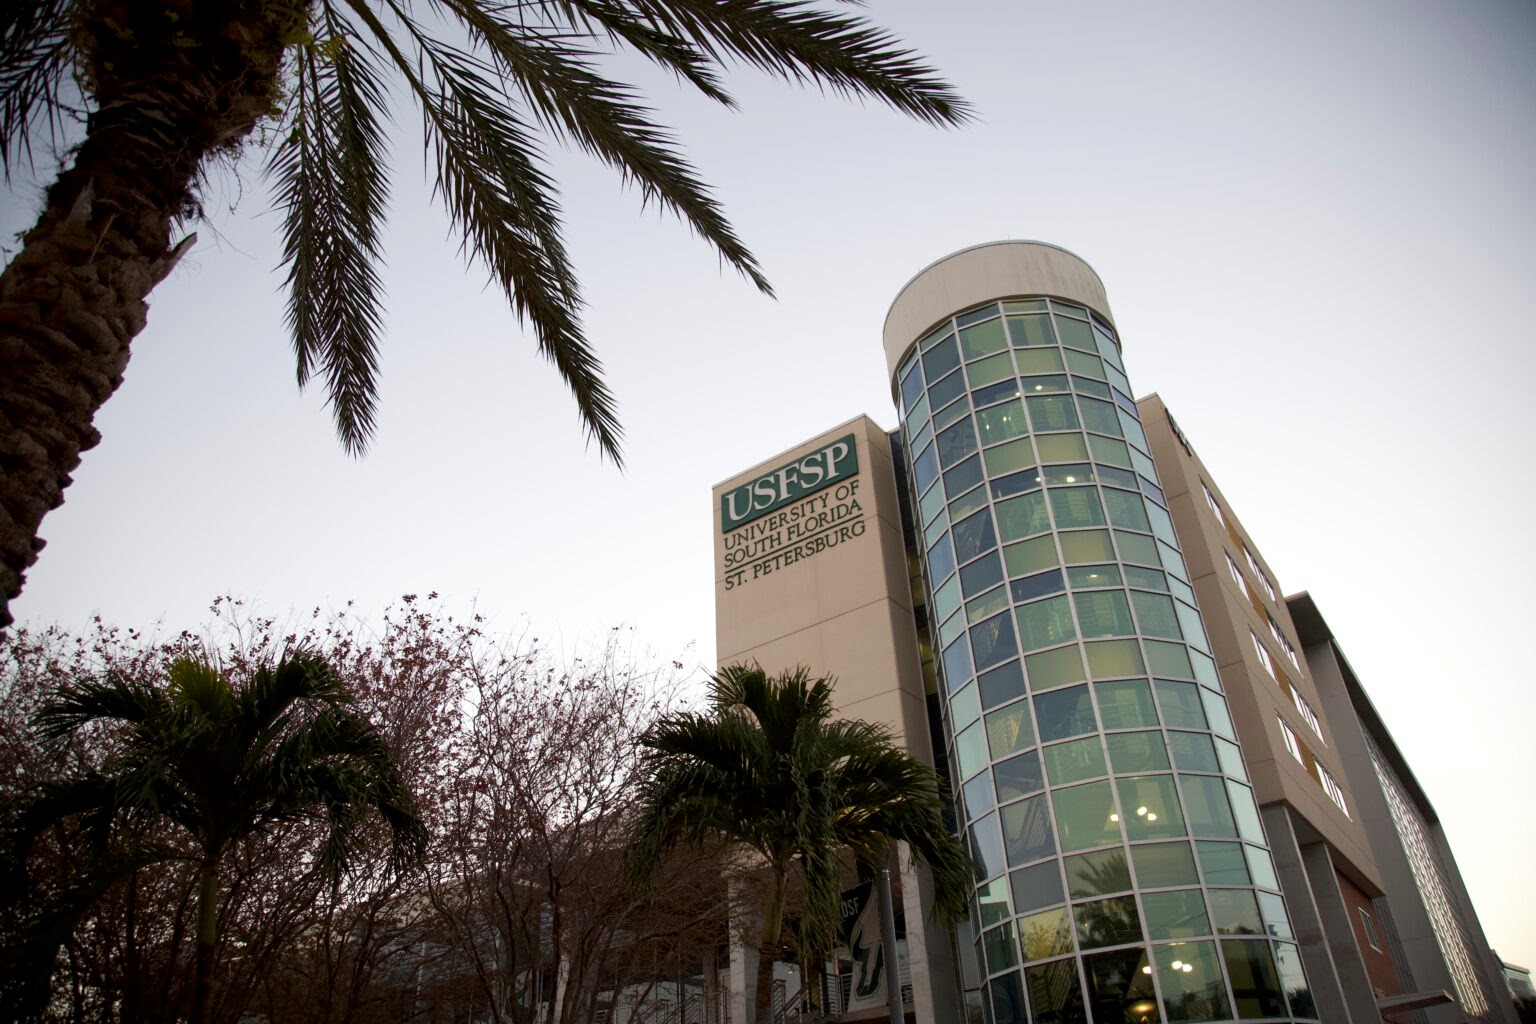 USF admission redirect helped amass 795 new students for USF St. Pete